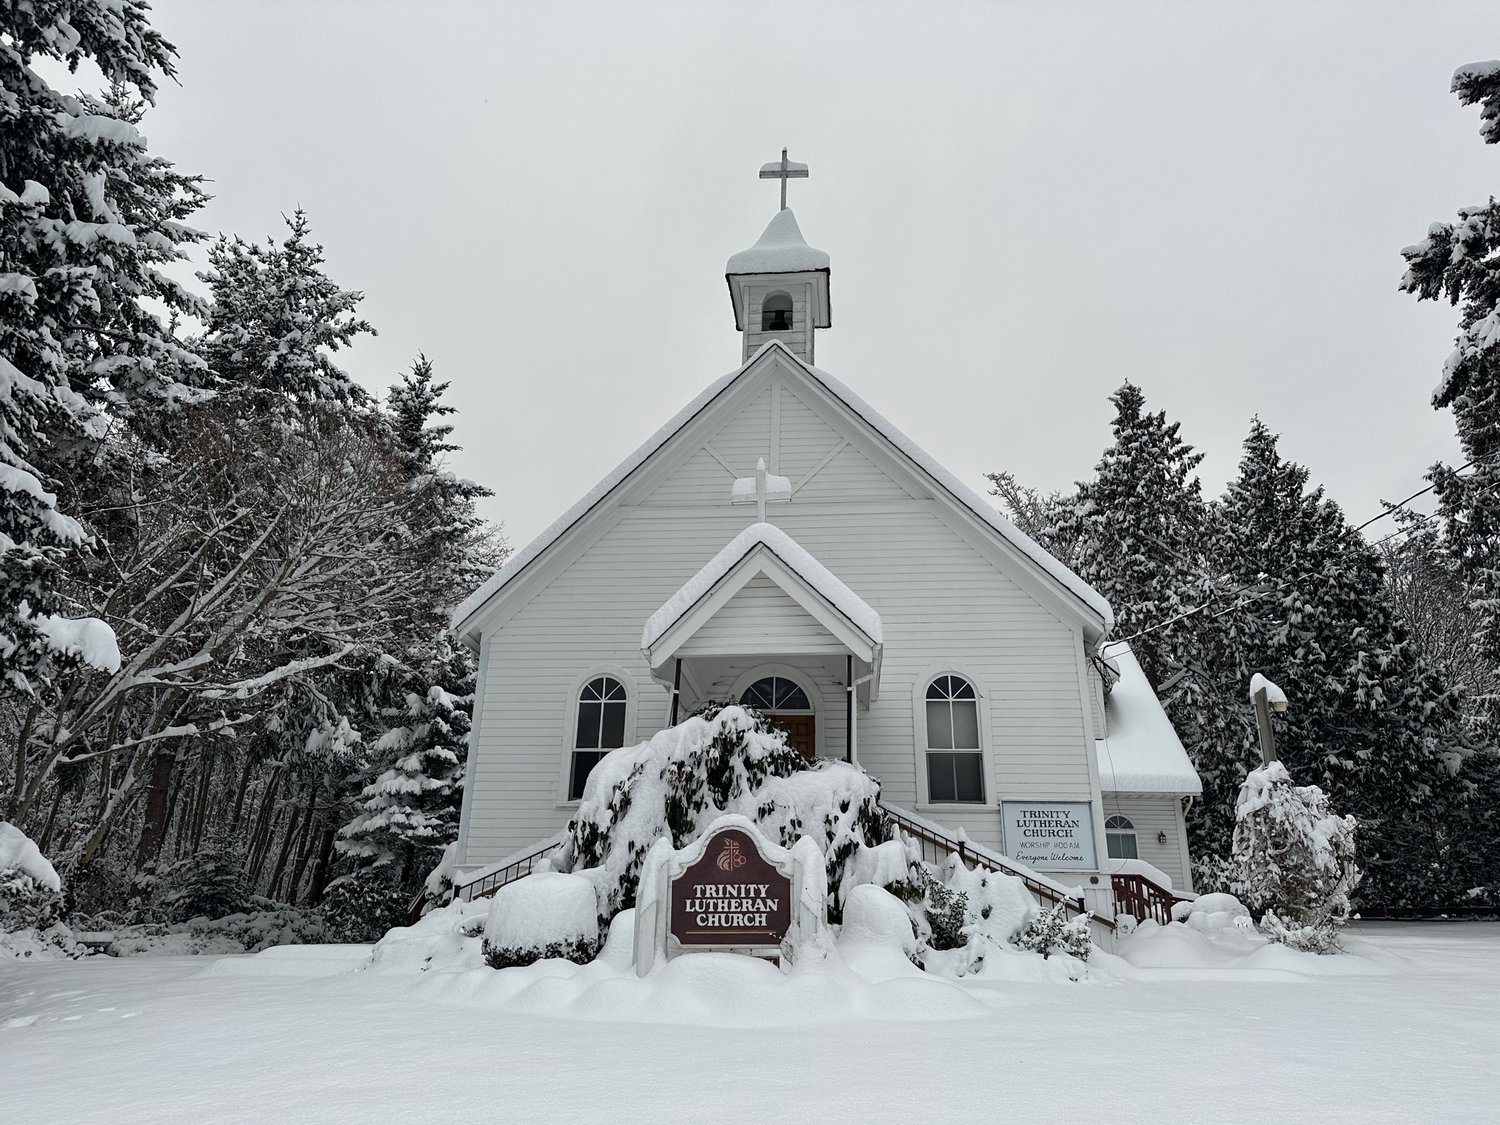 Trinity Lutheran Church on APA Road sat still and quiet on Tuesday, December 20 following a heavy snowstorm that struck the Pacific Northwest. The community is invited to Christmas services on December 25 at 11 a.m.